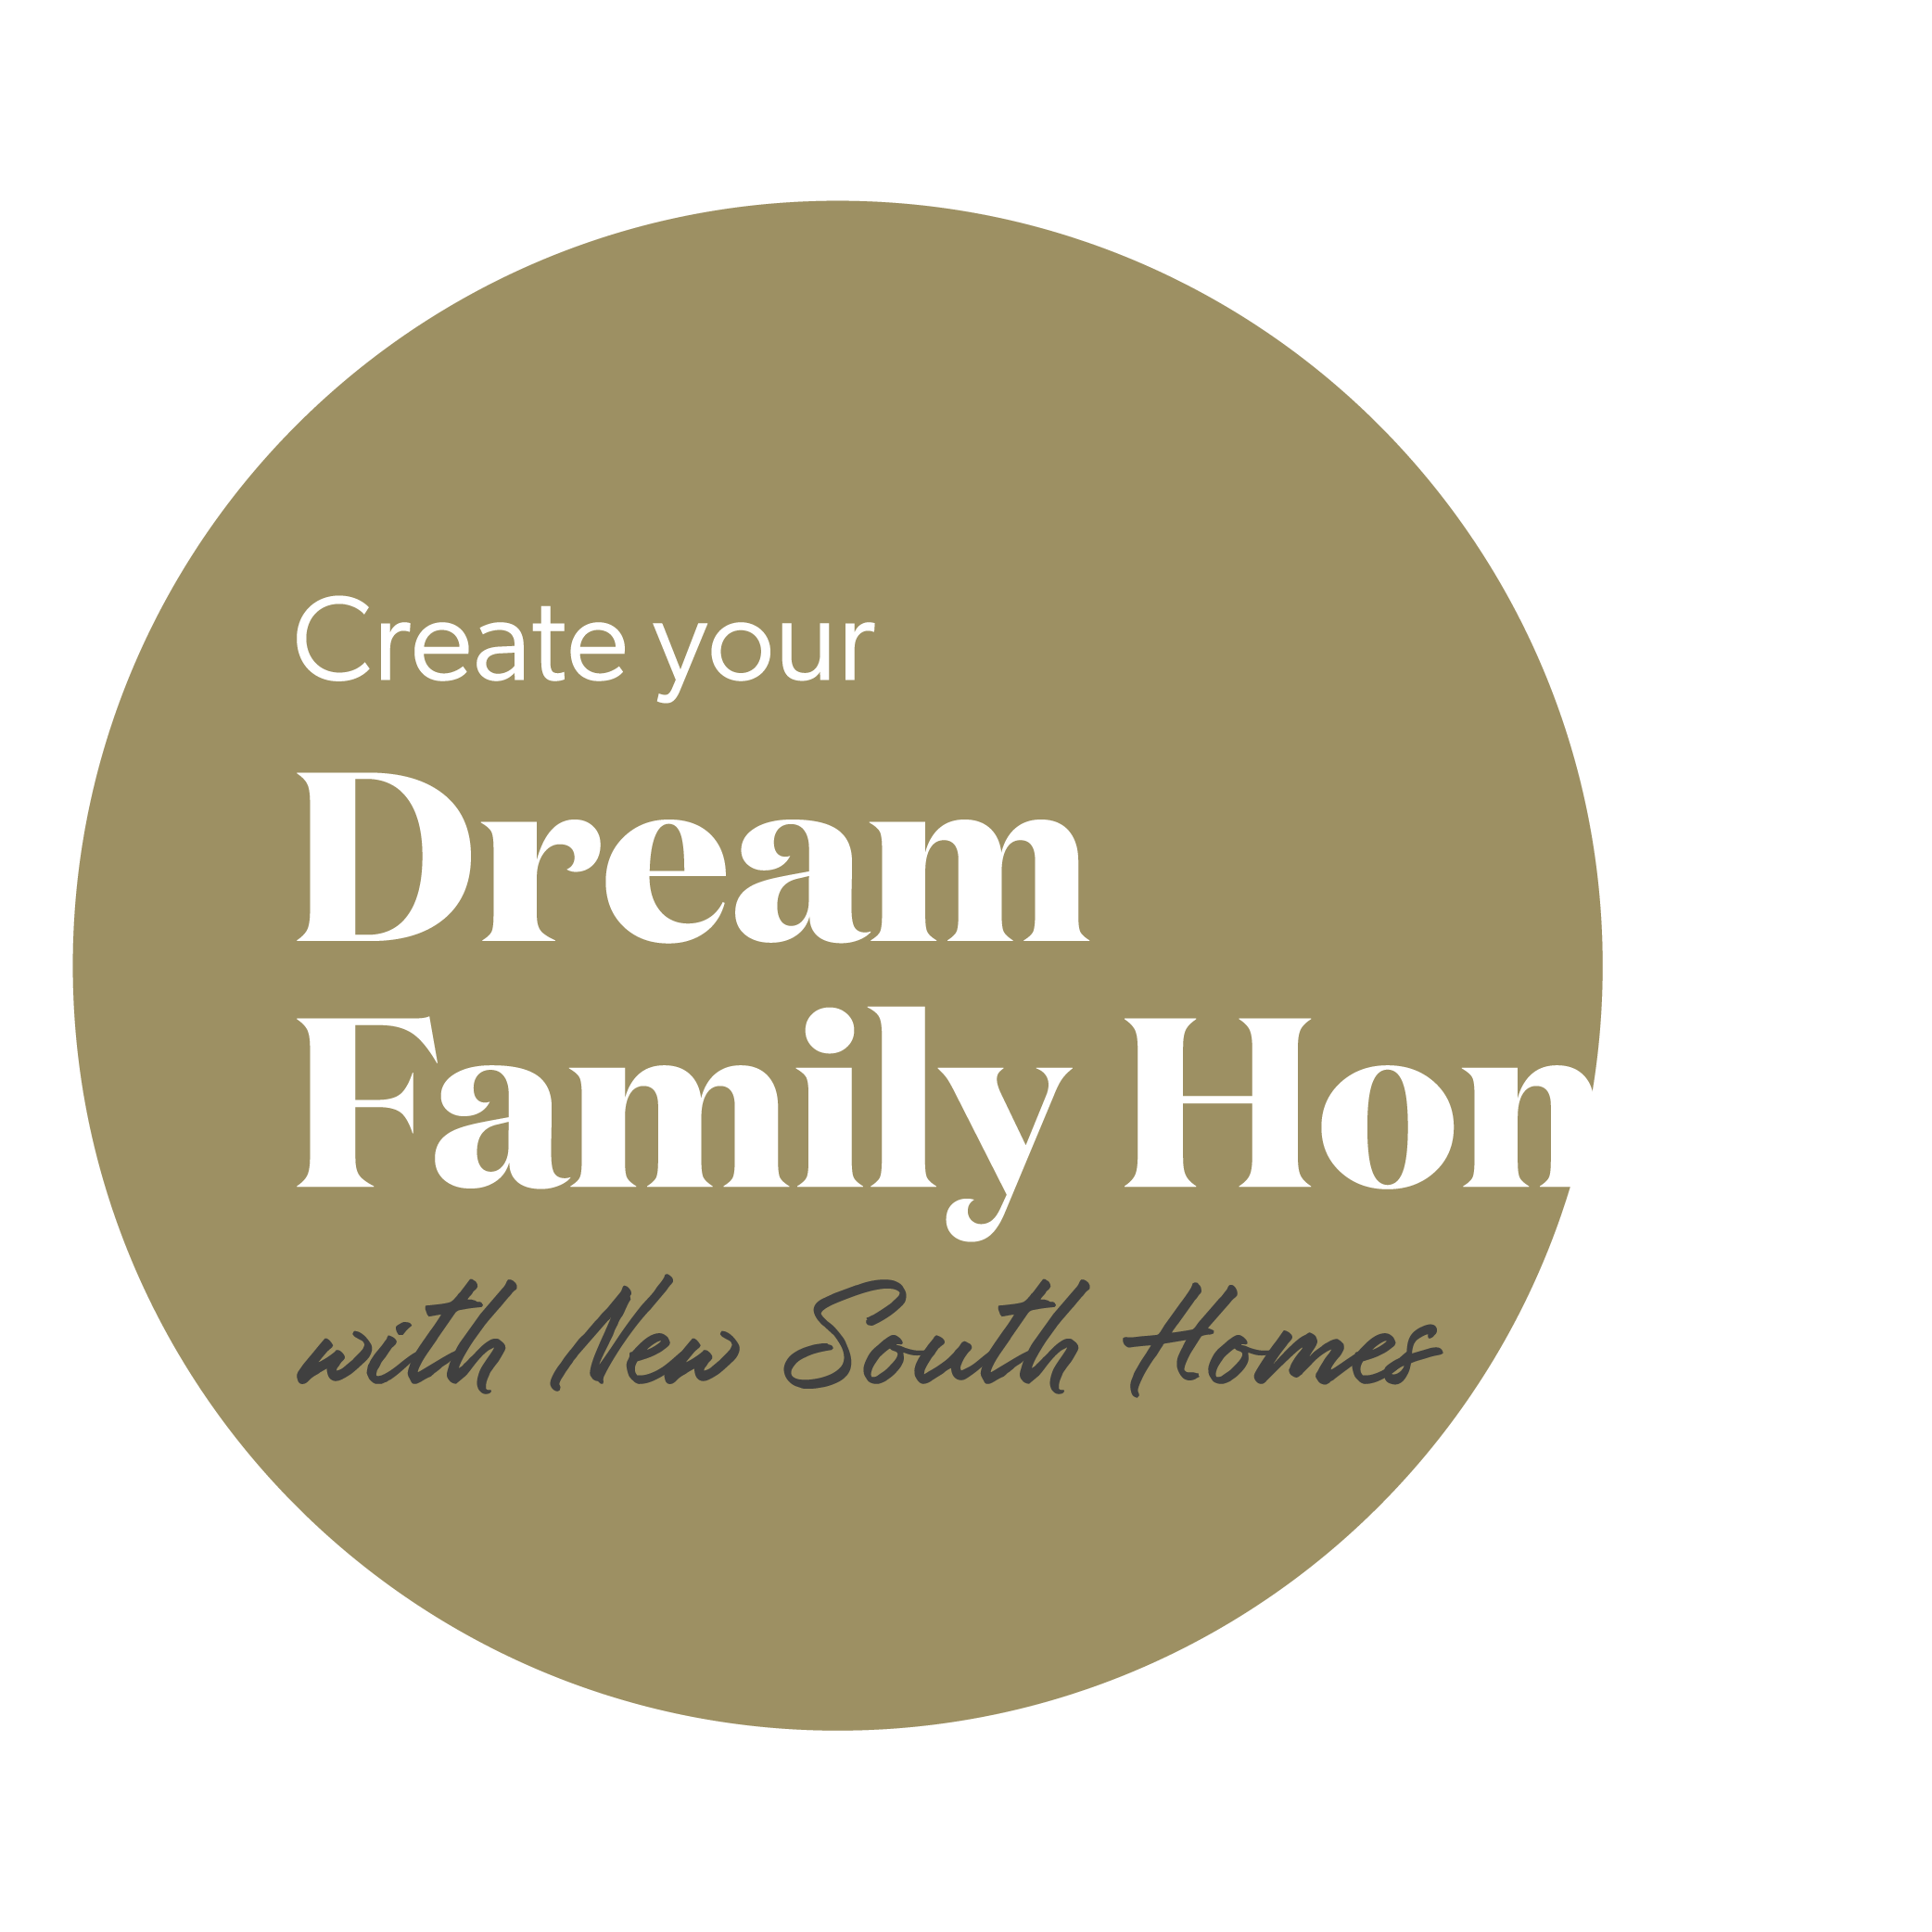 Create your Dream Family Home with New South Homes